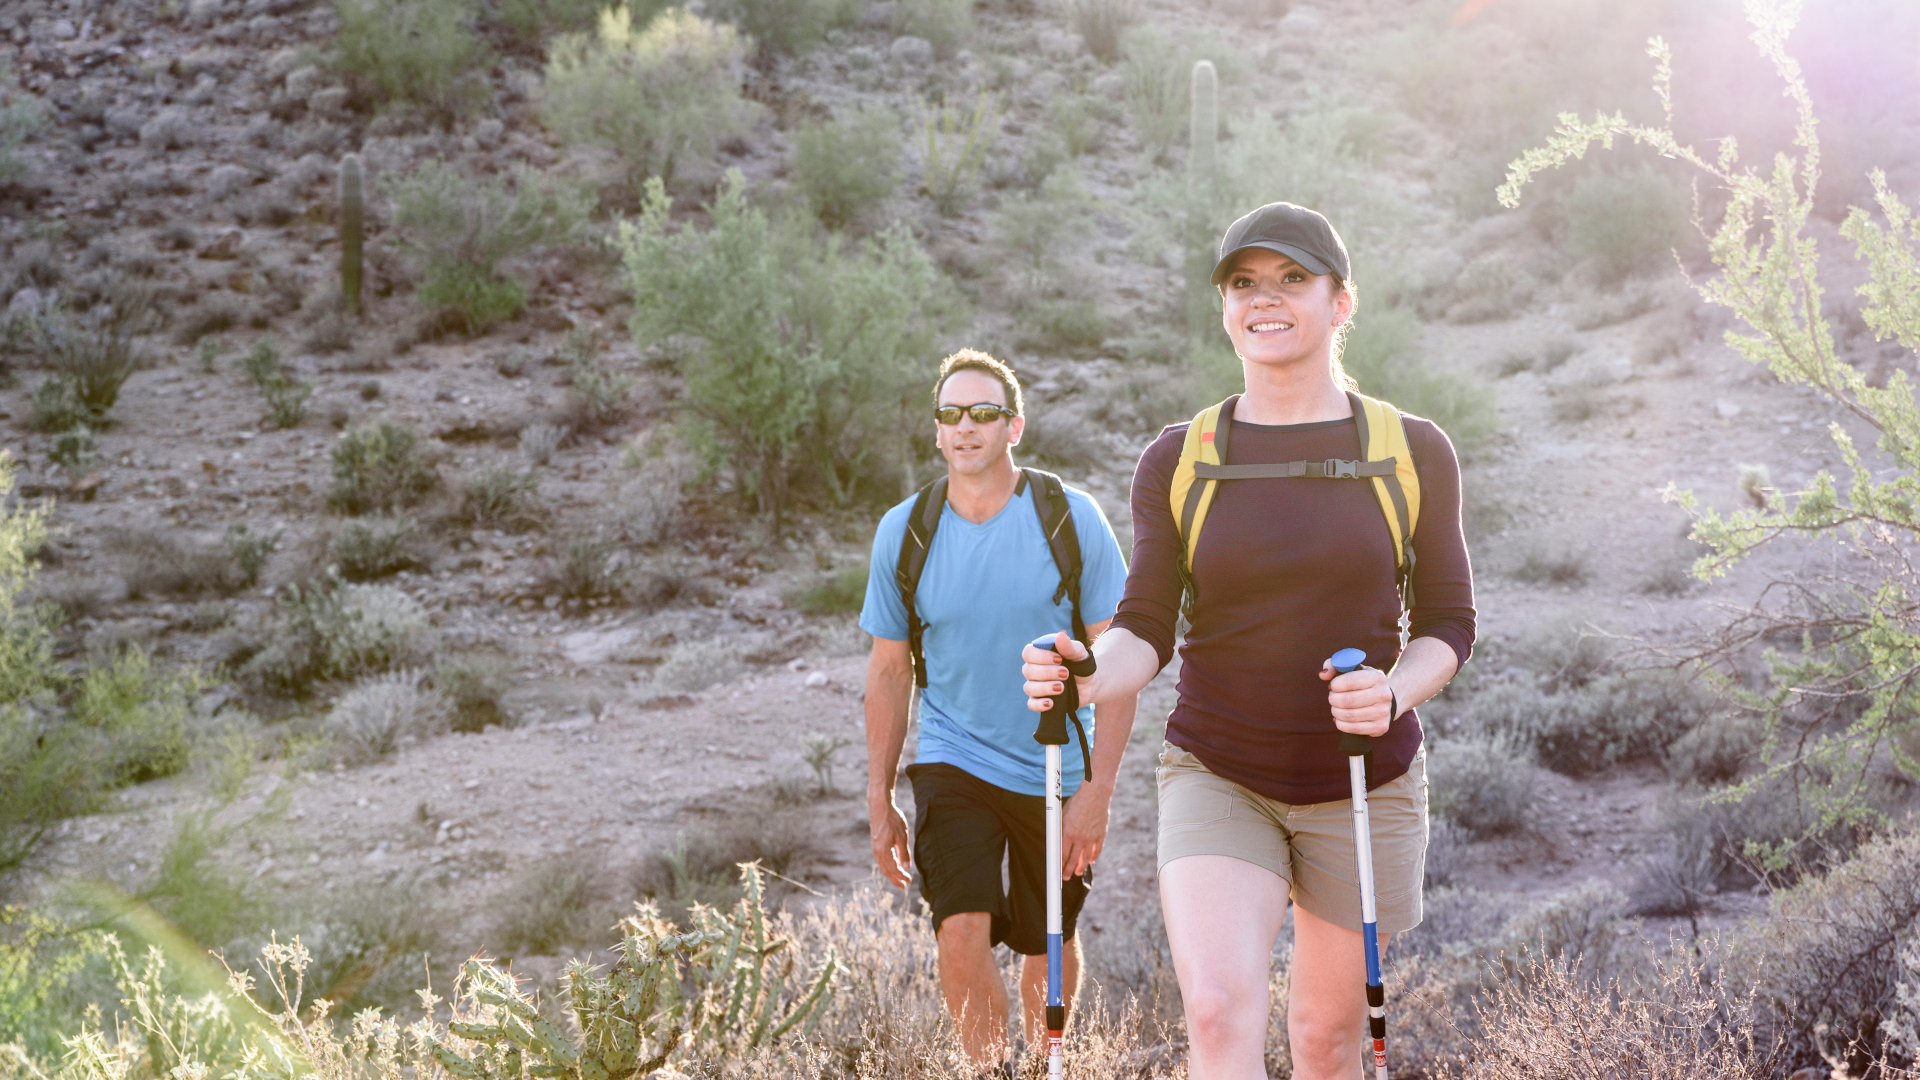 Hiking in hot weather: what's cooling best